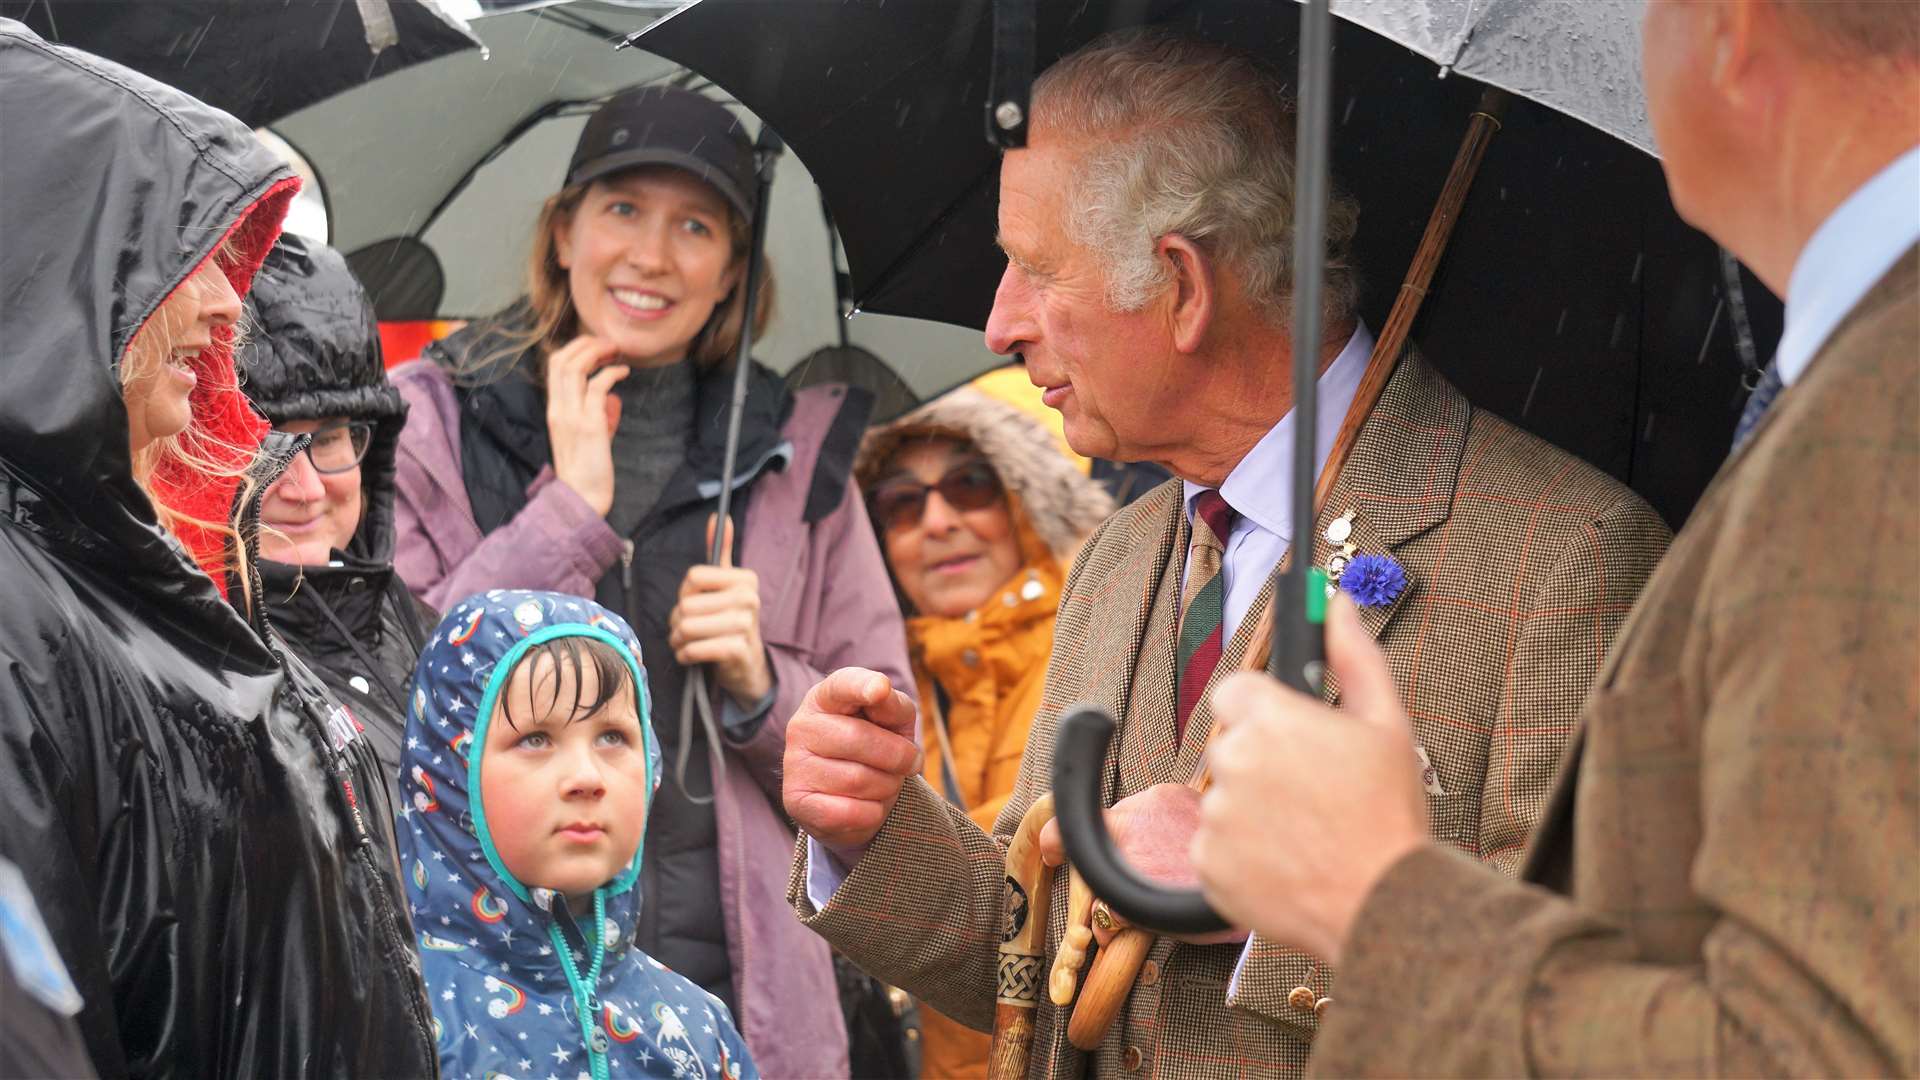 Prince Charles chats to some visitors at the event. Picture: DGS